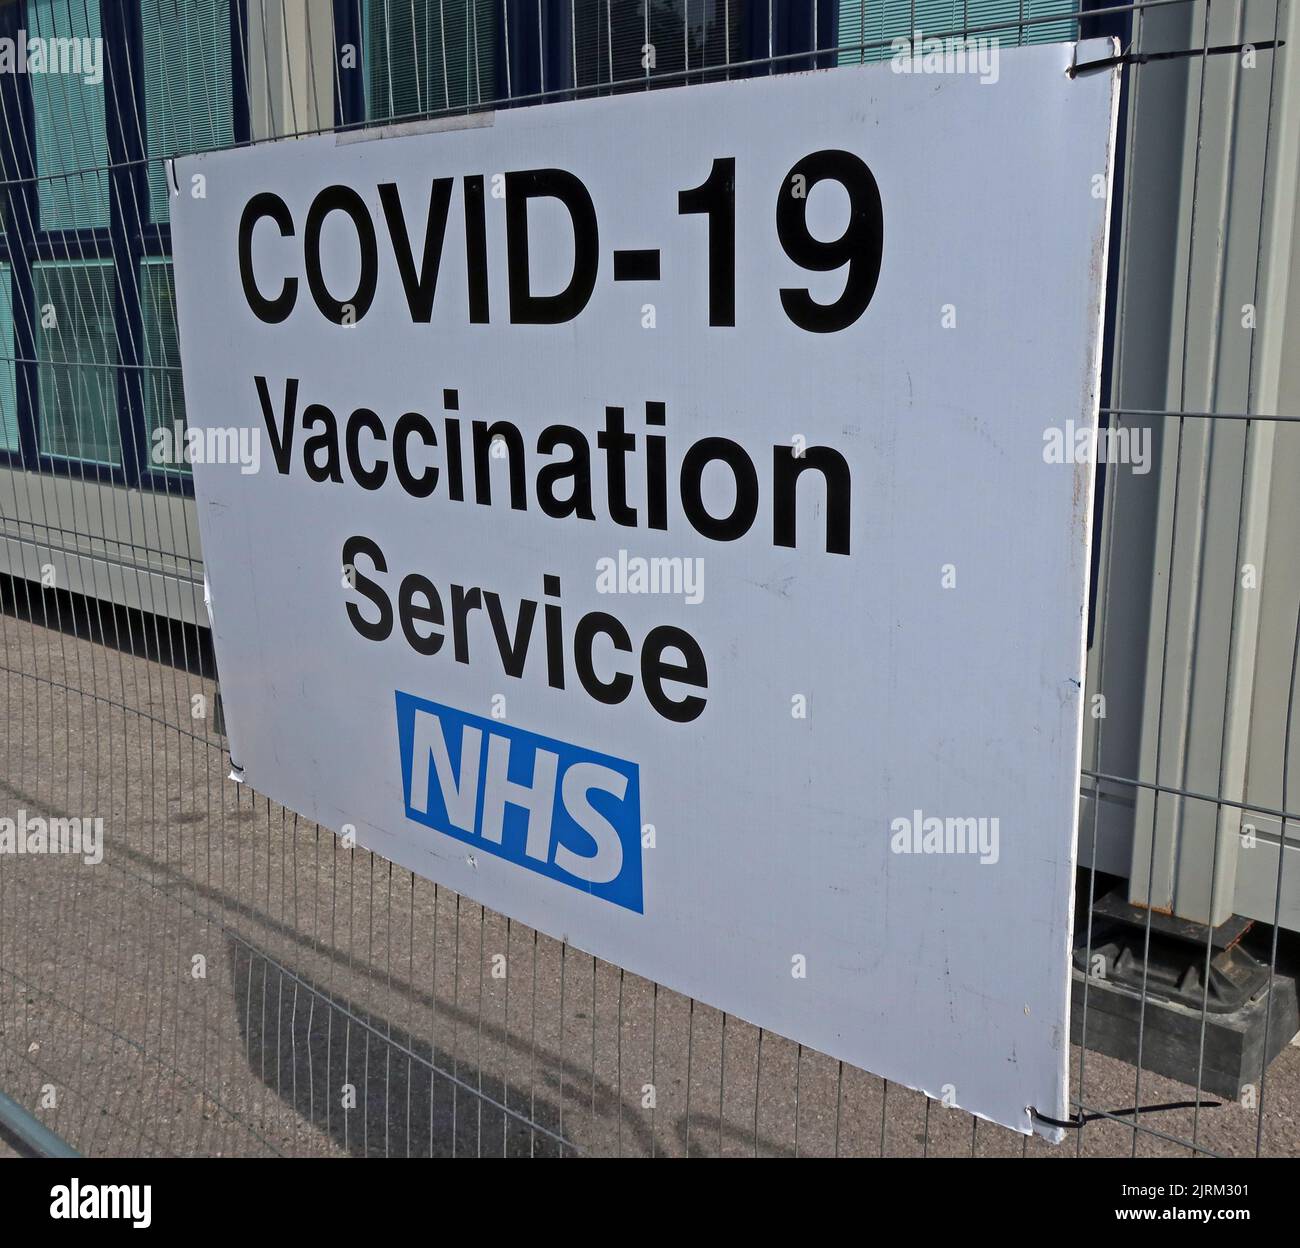 Covid-19 vaccination Service NHS, Blackpool South Shore, Lancashire, England, UK, FY1 Stock Photo